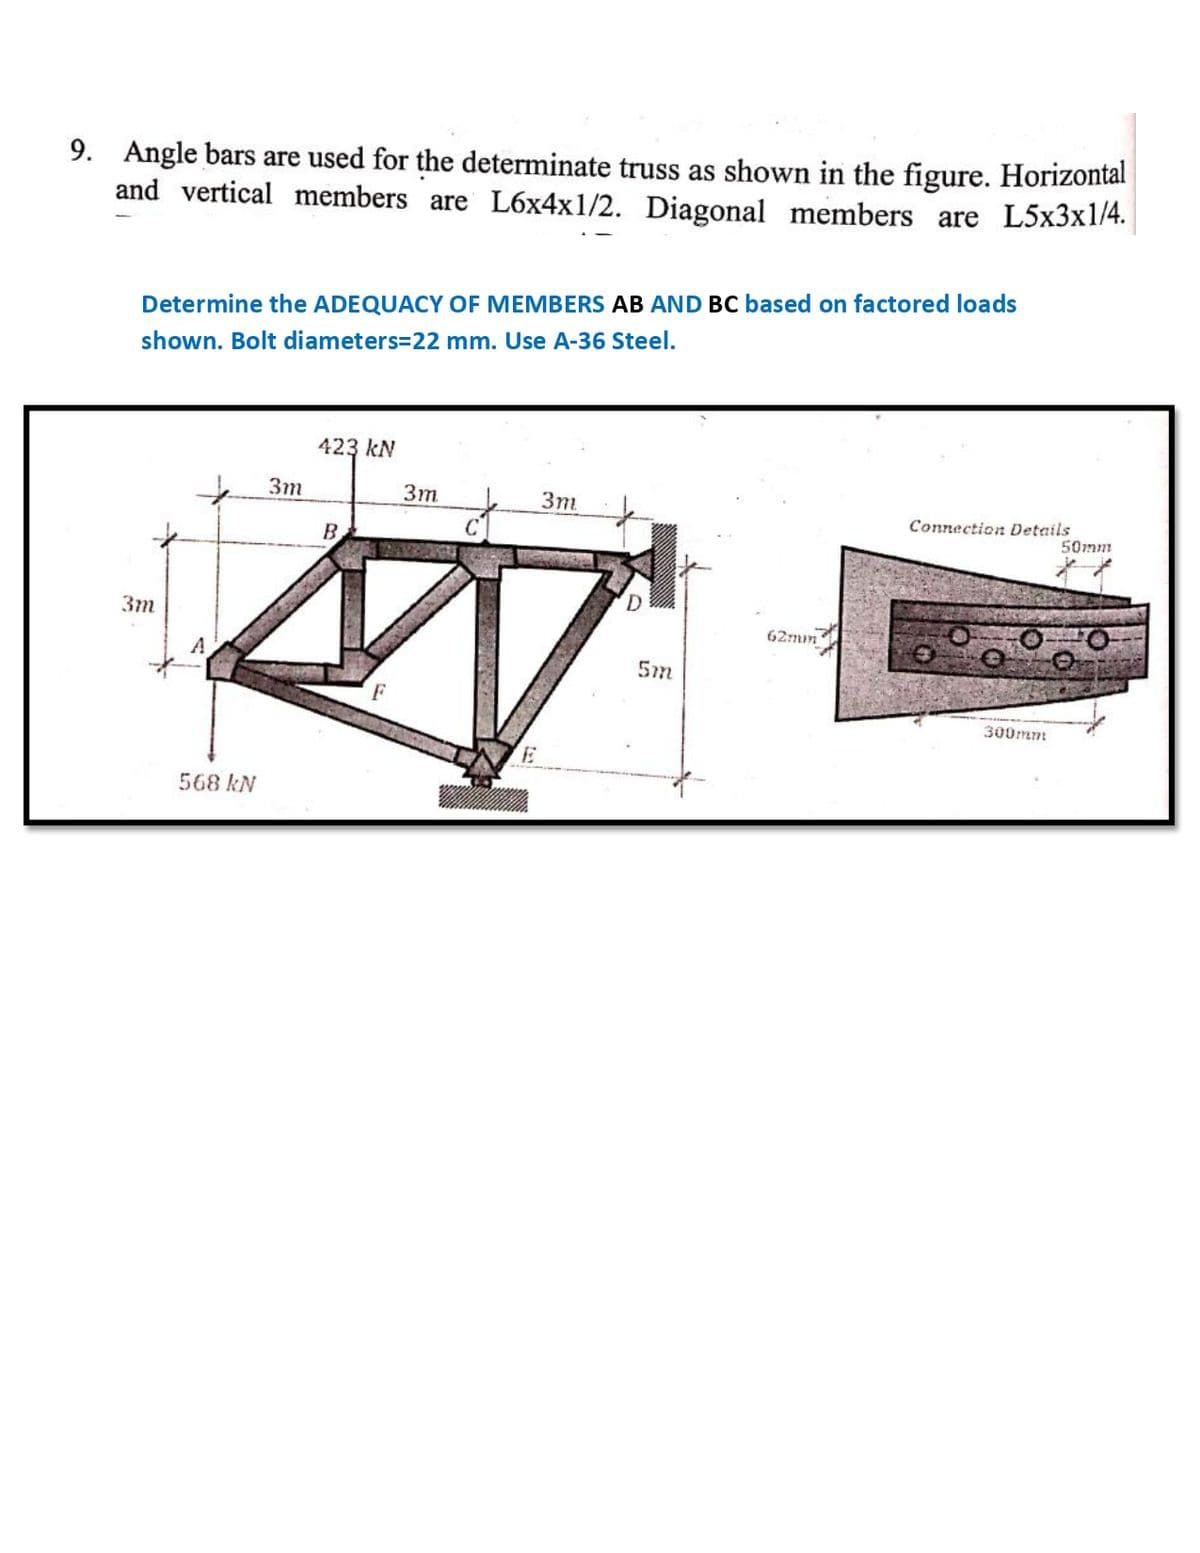 9. Angle bars are used for the determinate truss as shown in the figure. Horizontal
and vertical members are L6x4x1/2. Diagonal members are L5x3x1/4.
Determine the ADEQUACY OF MEMBERS AB AND BC based on factored loads
shown. Bolt diameters=22 mm. Use A-36 Steel.
423 kN
3m
3m
Зт
Connection Details
50mm
B.
D.
Зт
62mm
A.
5m
F
300mmm
568 kN
